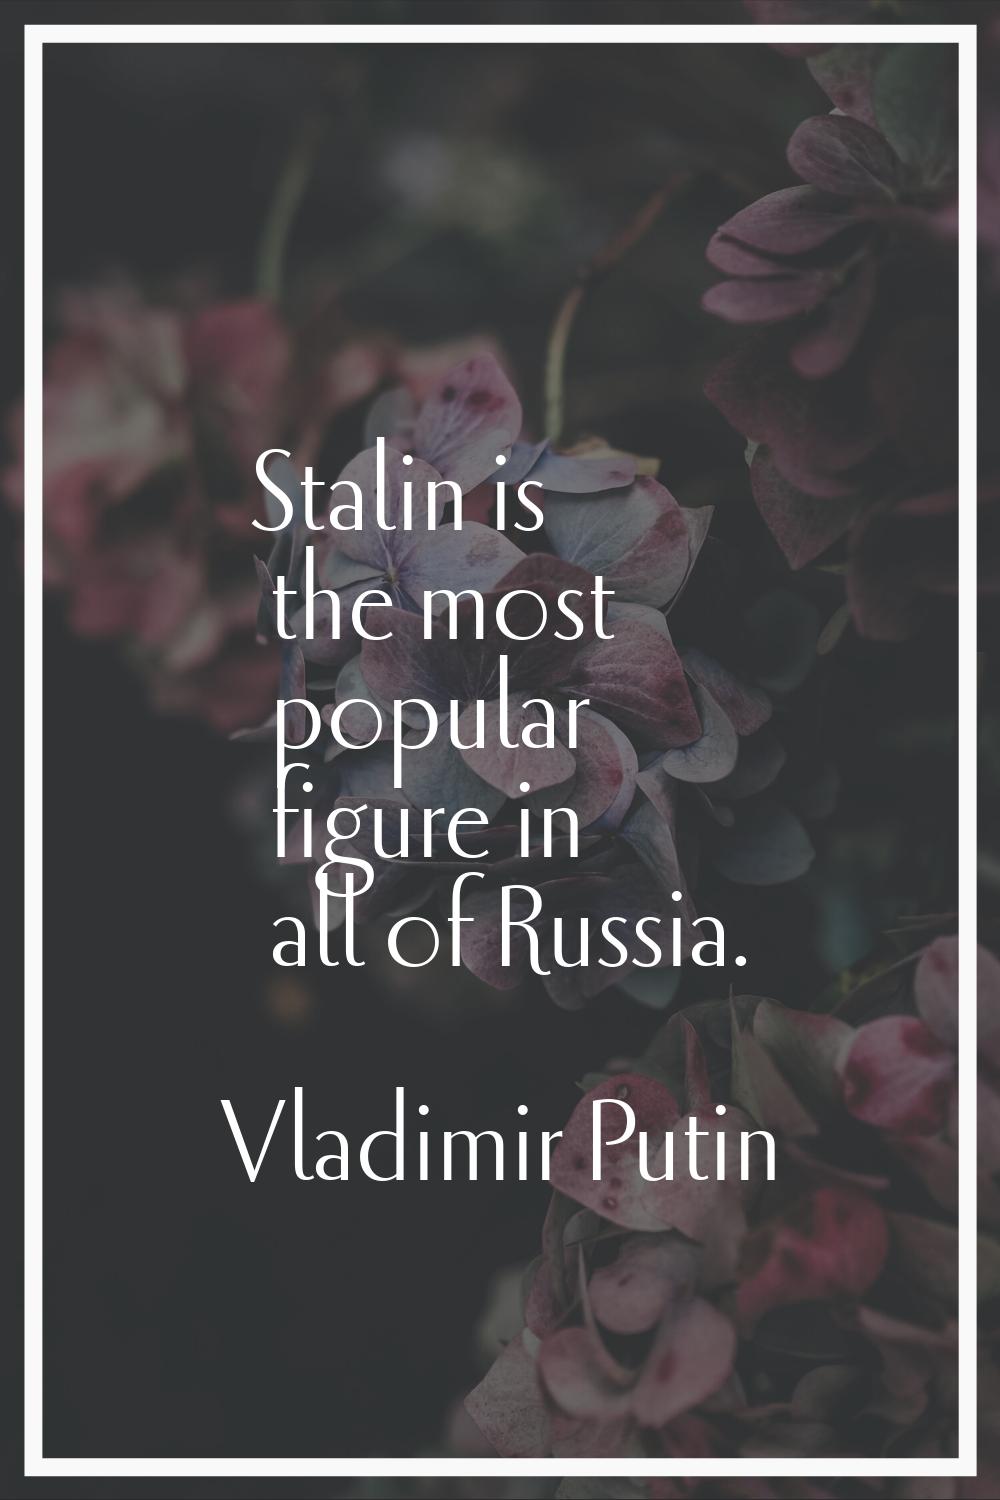 Stalin is the most popular figure in all of Russia.